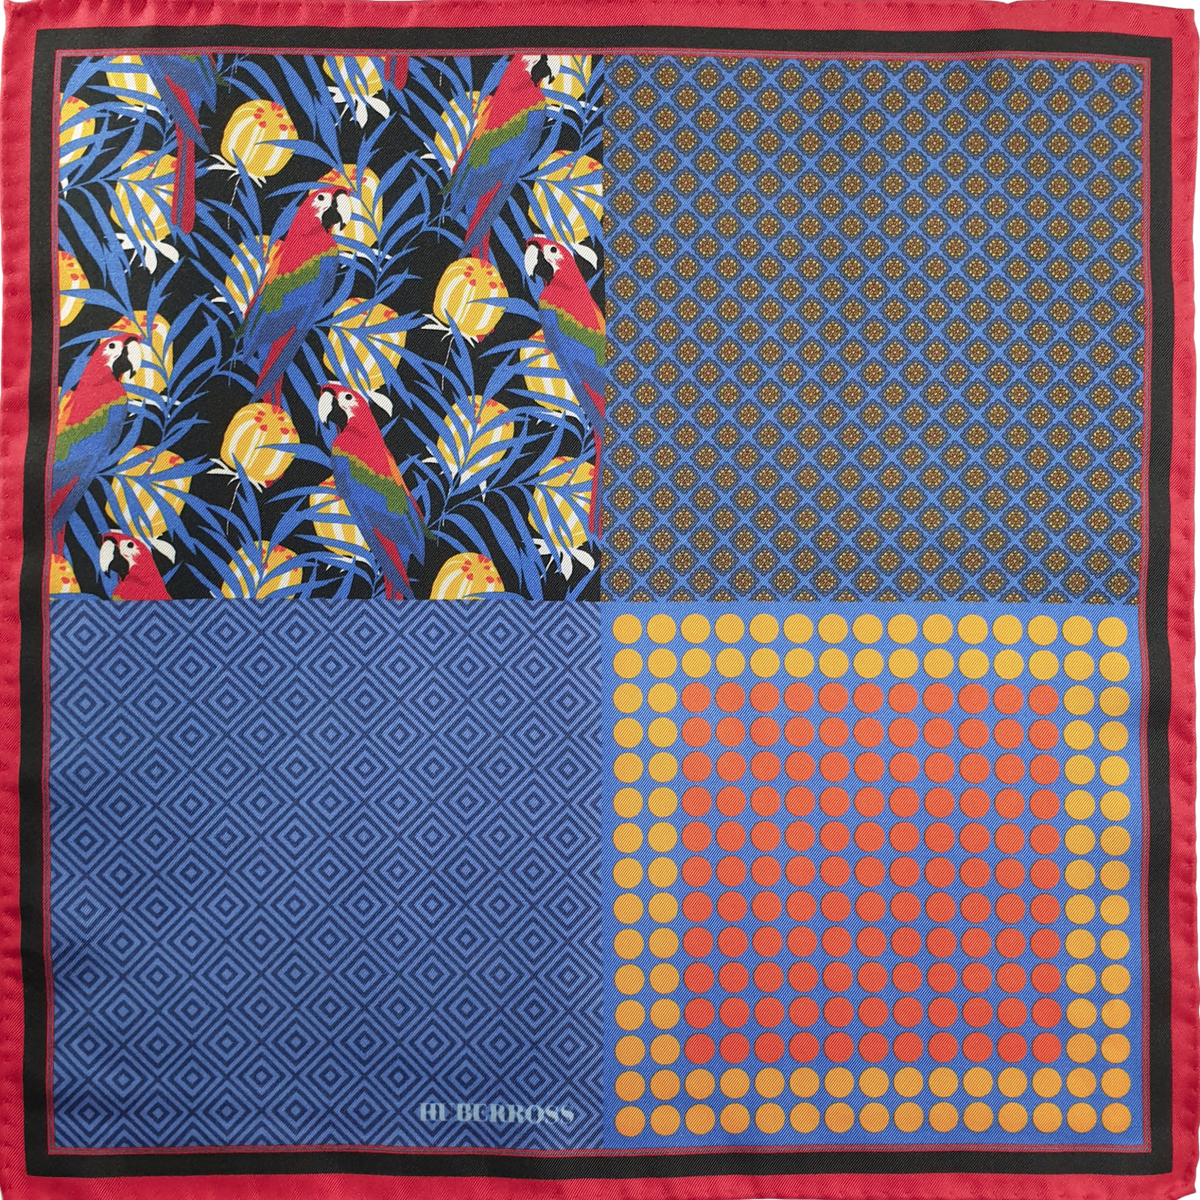 HUBERROSS 100% Silk Pocket Square PS130 Parrot and Cantaloupe